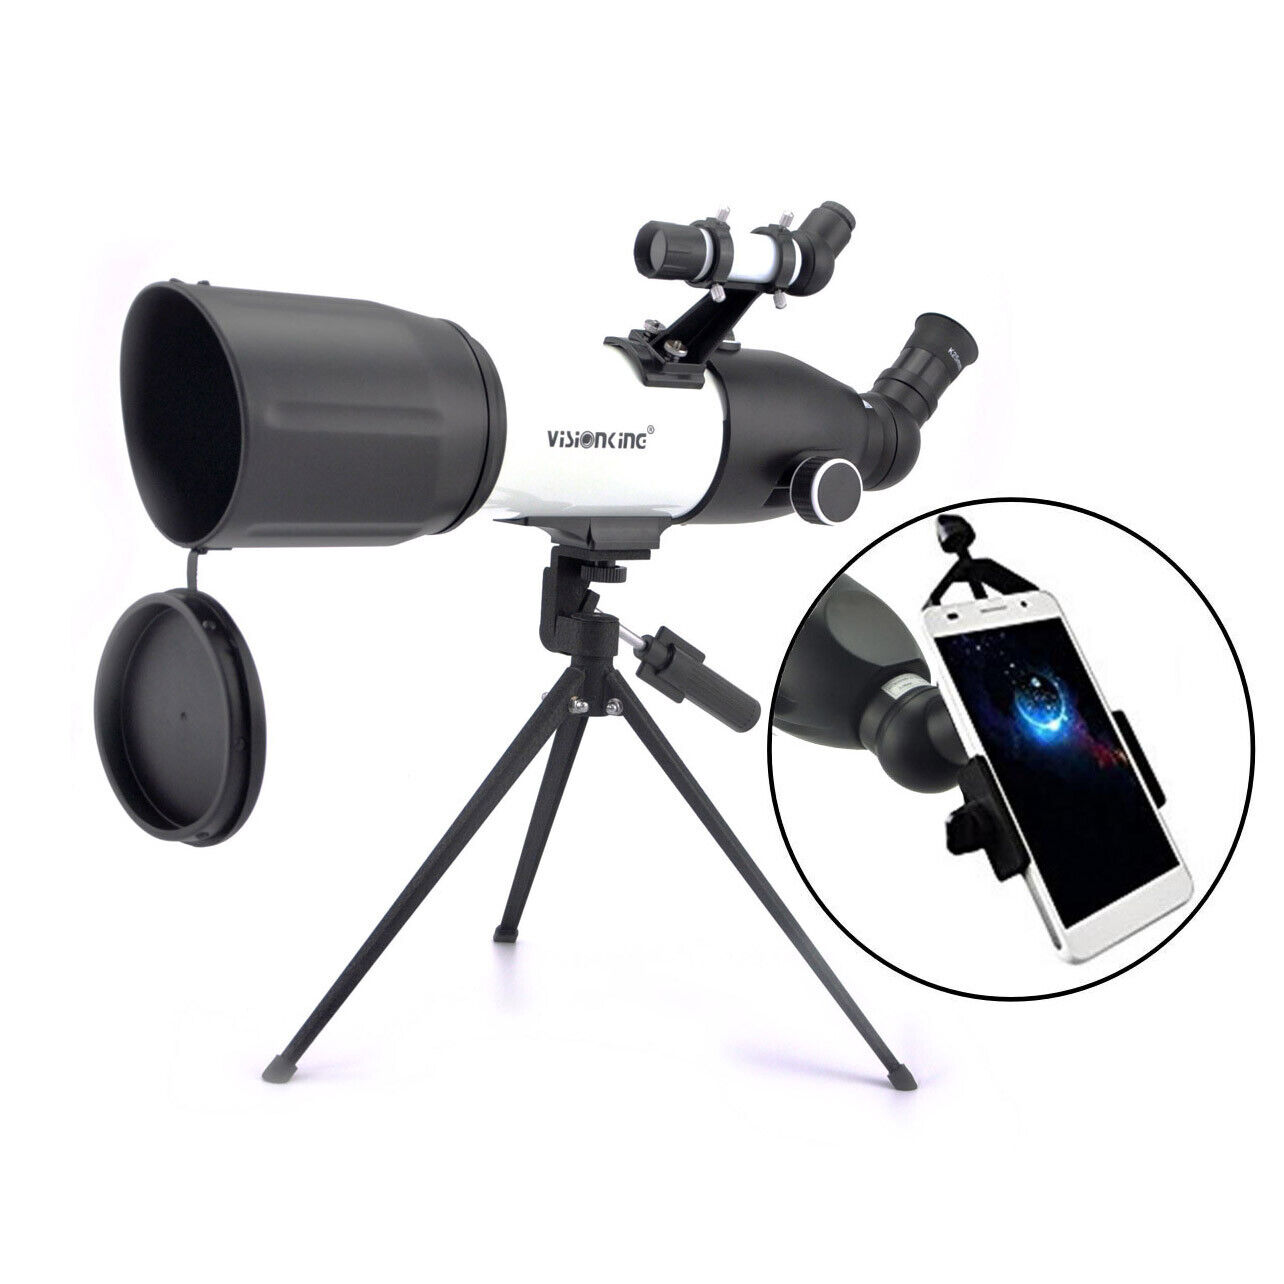 Visionking 400X 80mm Refractor Astronomical Telescope + Smart phone Adapter